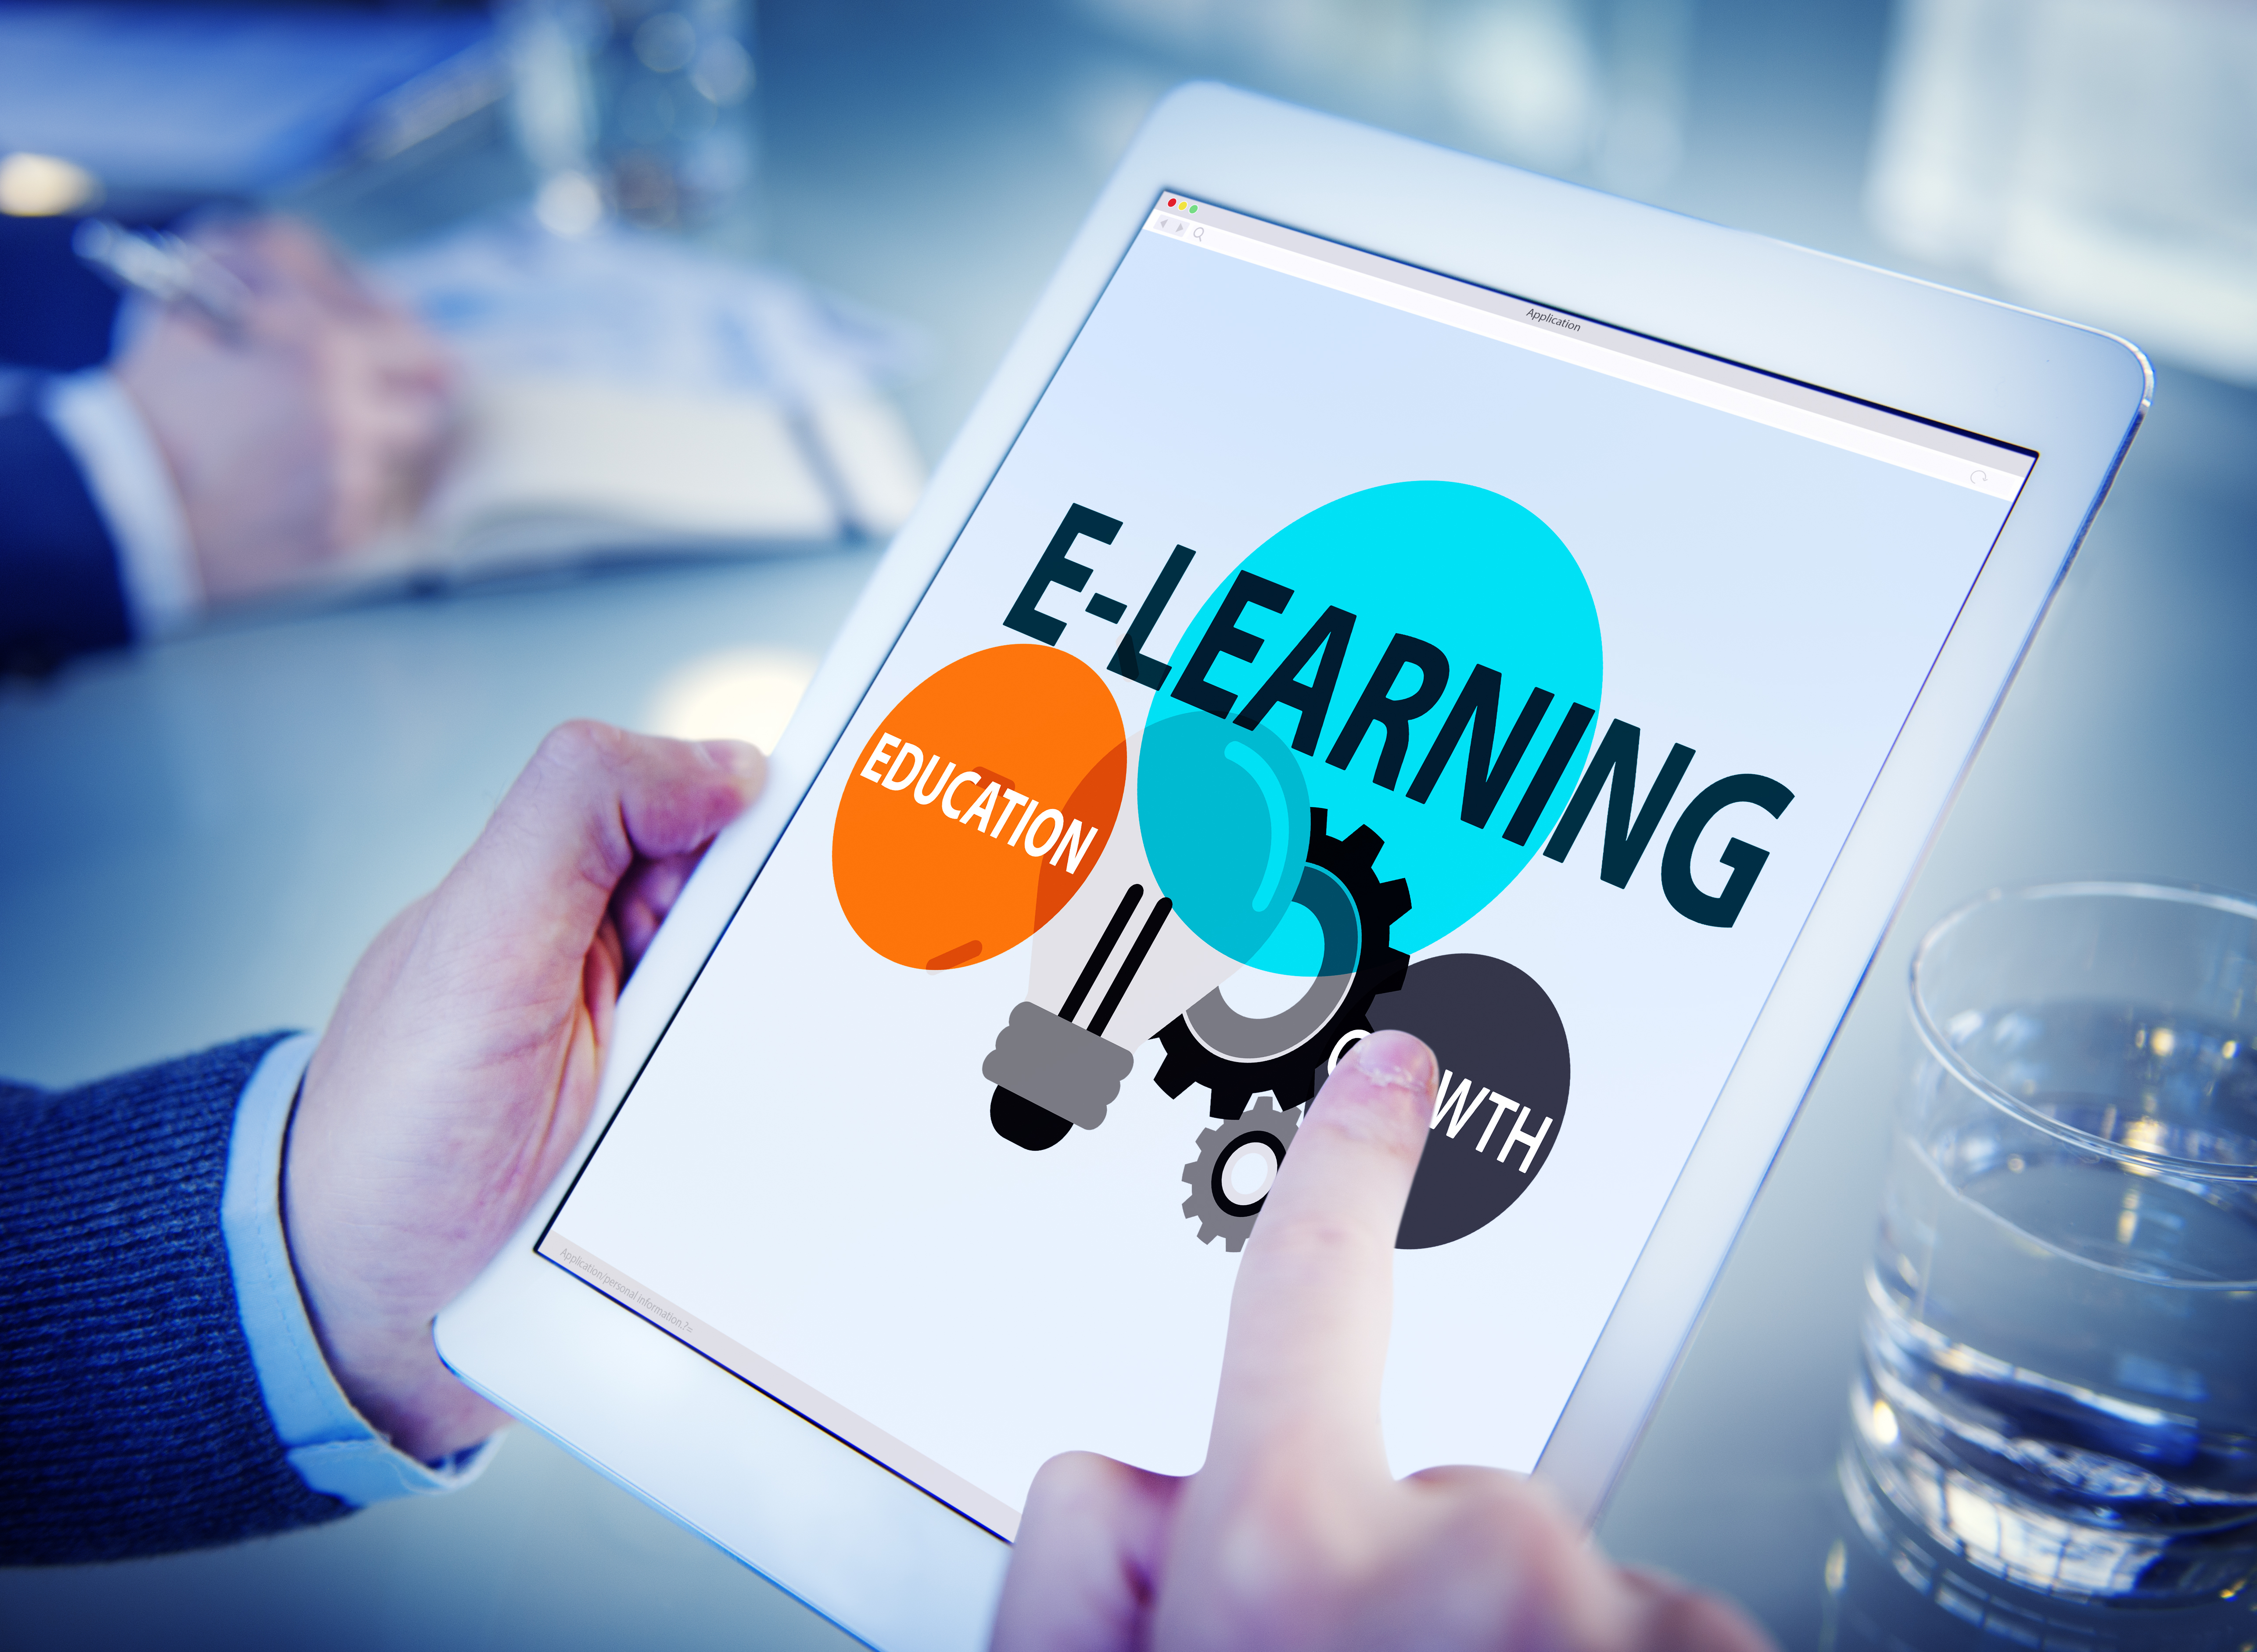 Digital Classrooms 2.0: The Leading Elearning App Development Companies to Watch